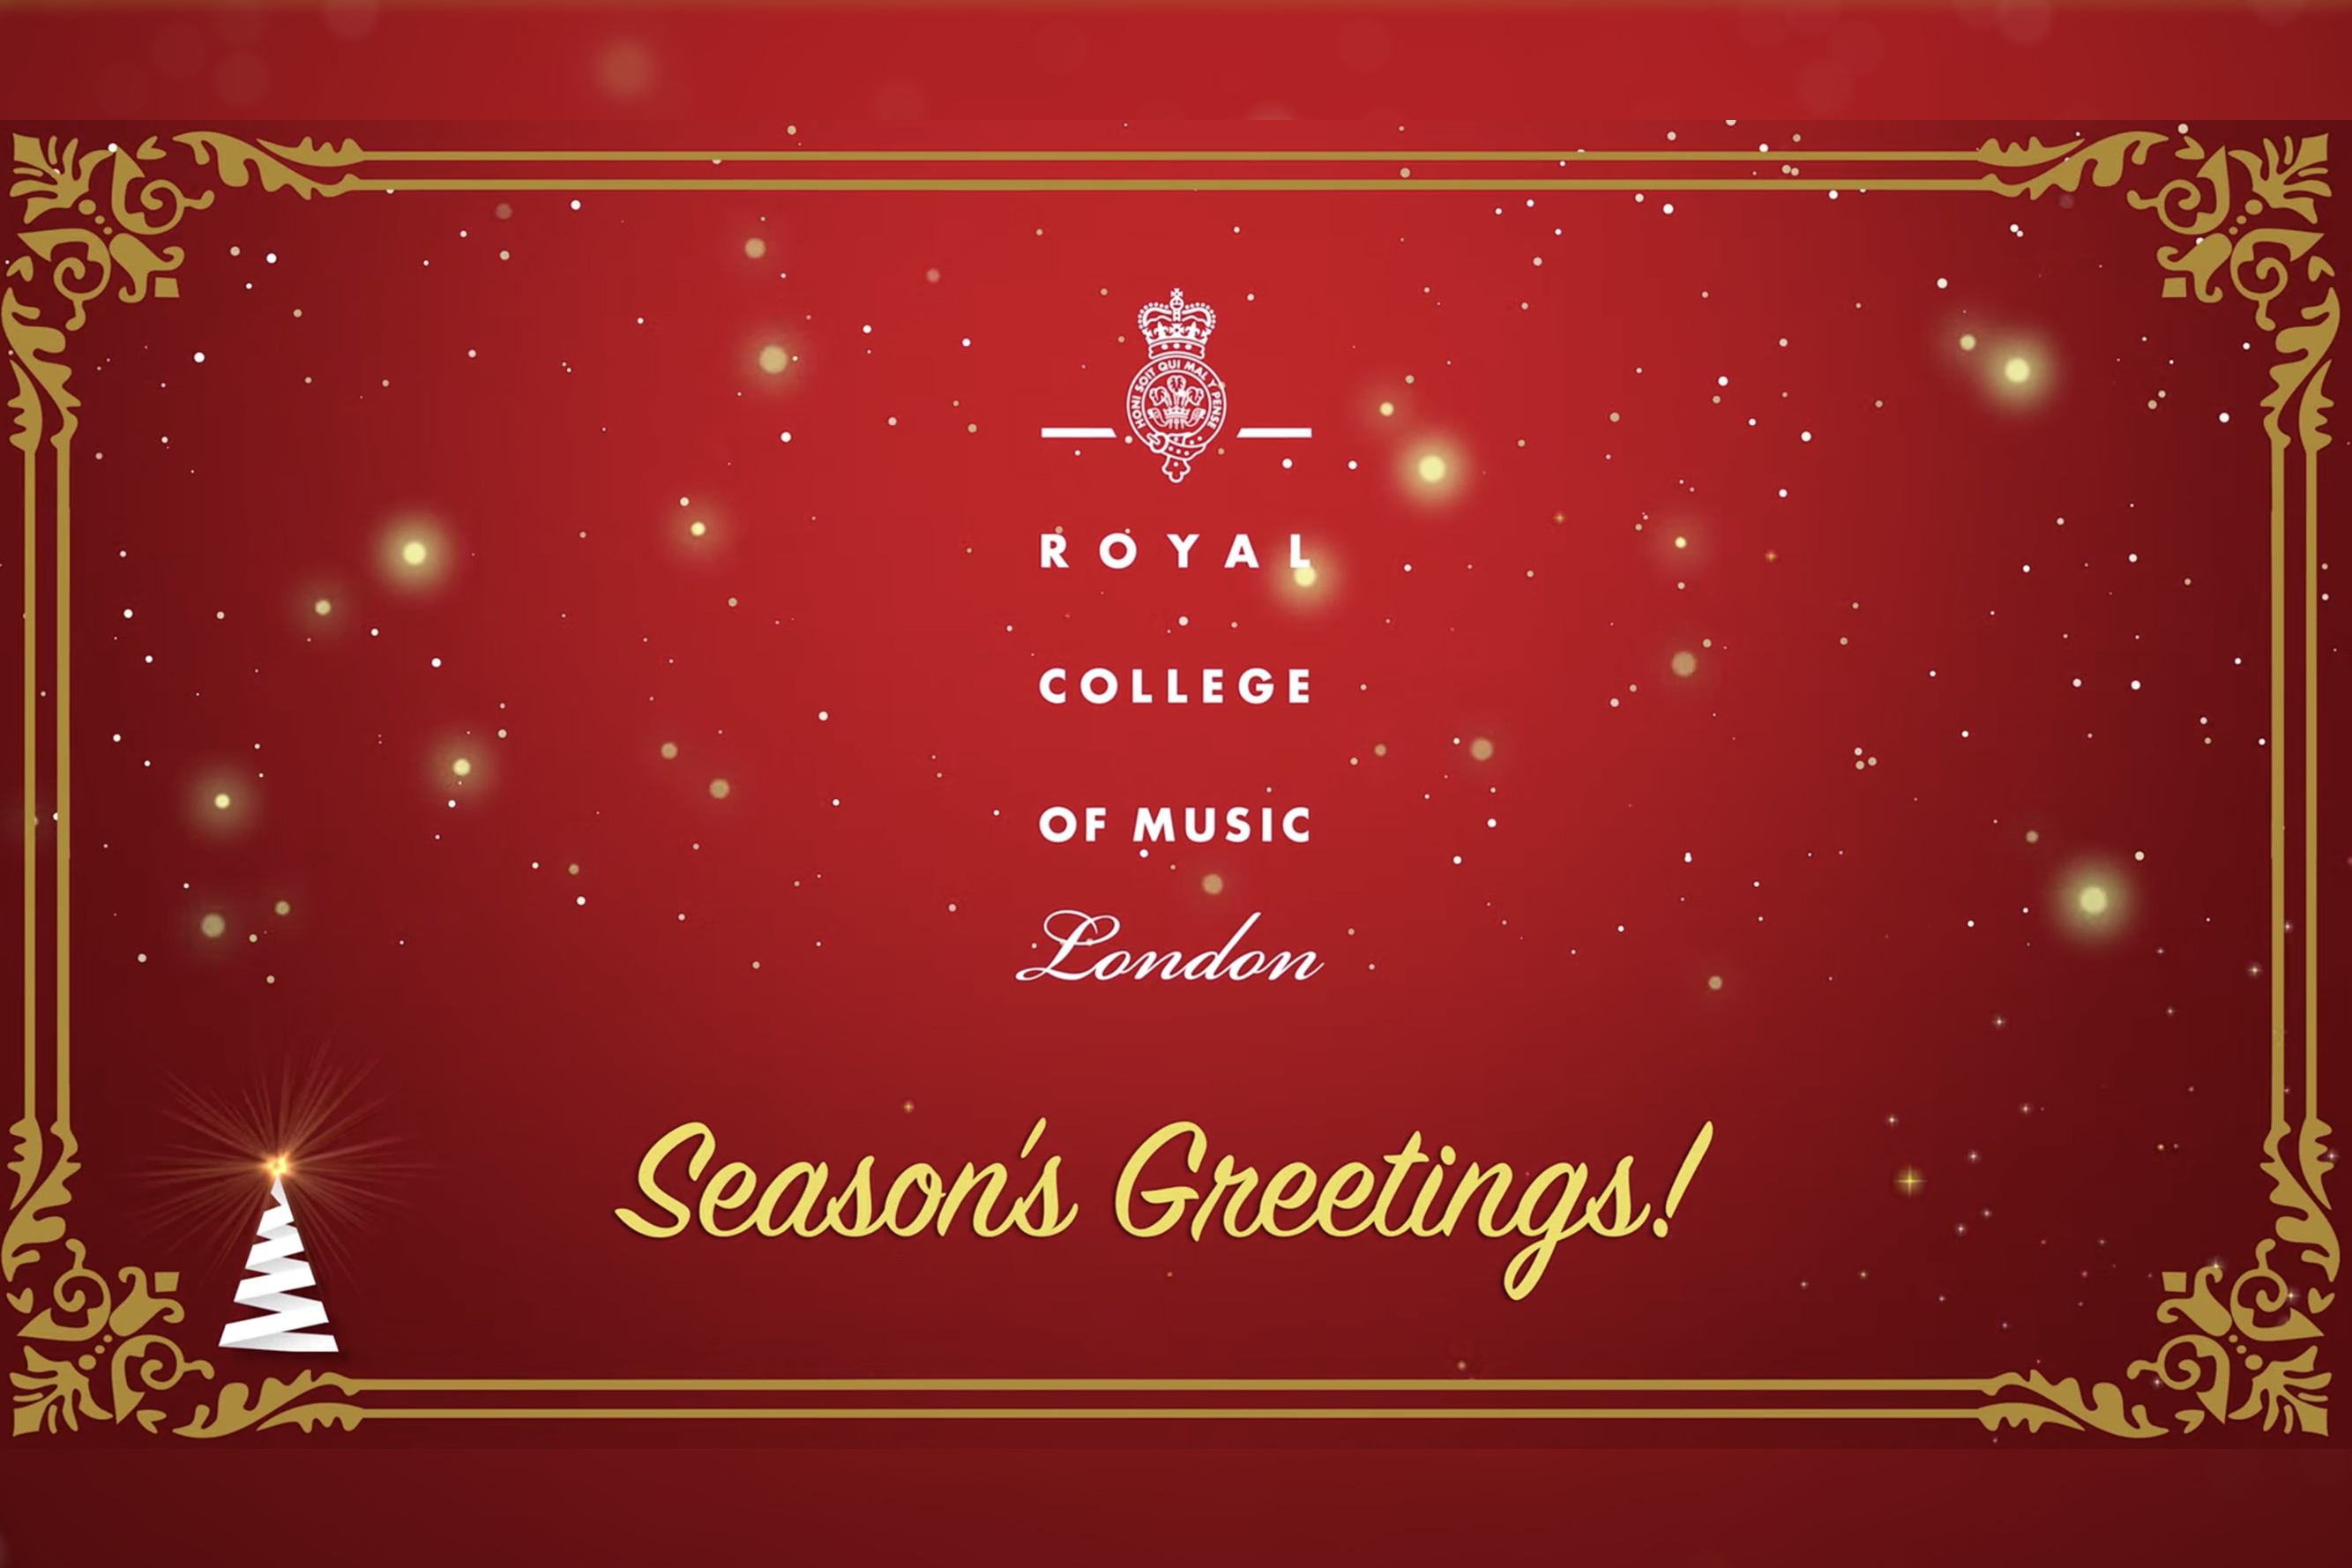 Season’s Greetings from the Royal College of Music 2022